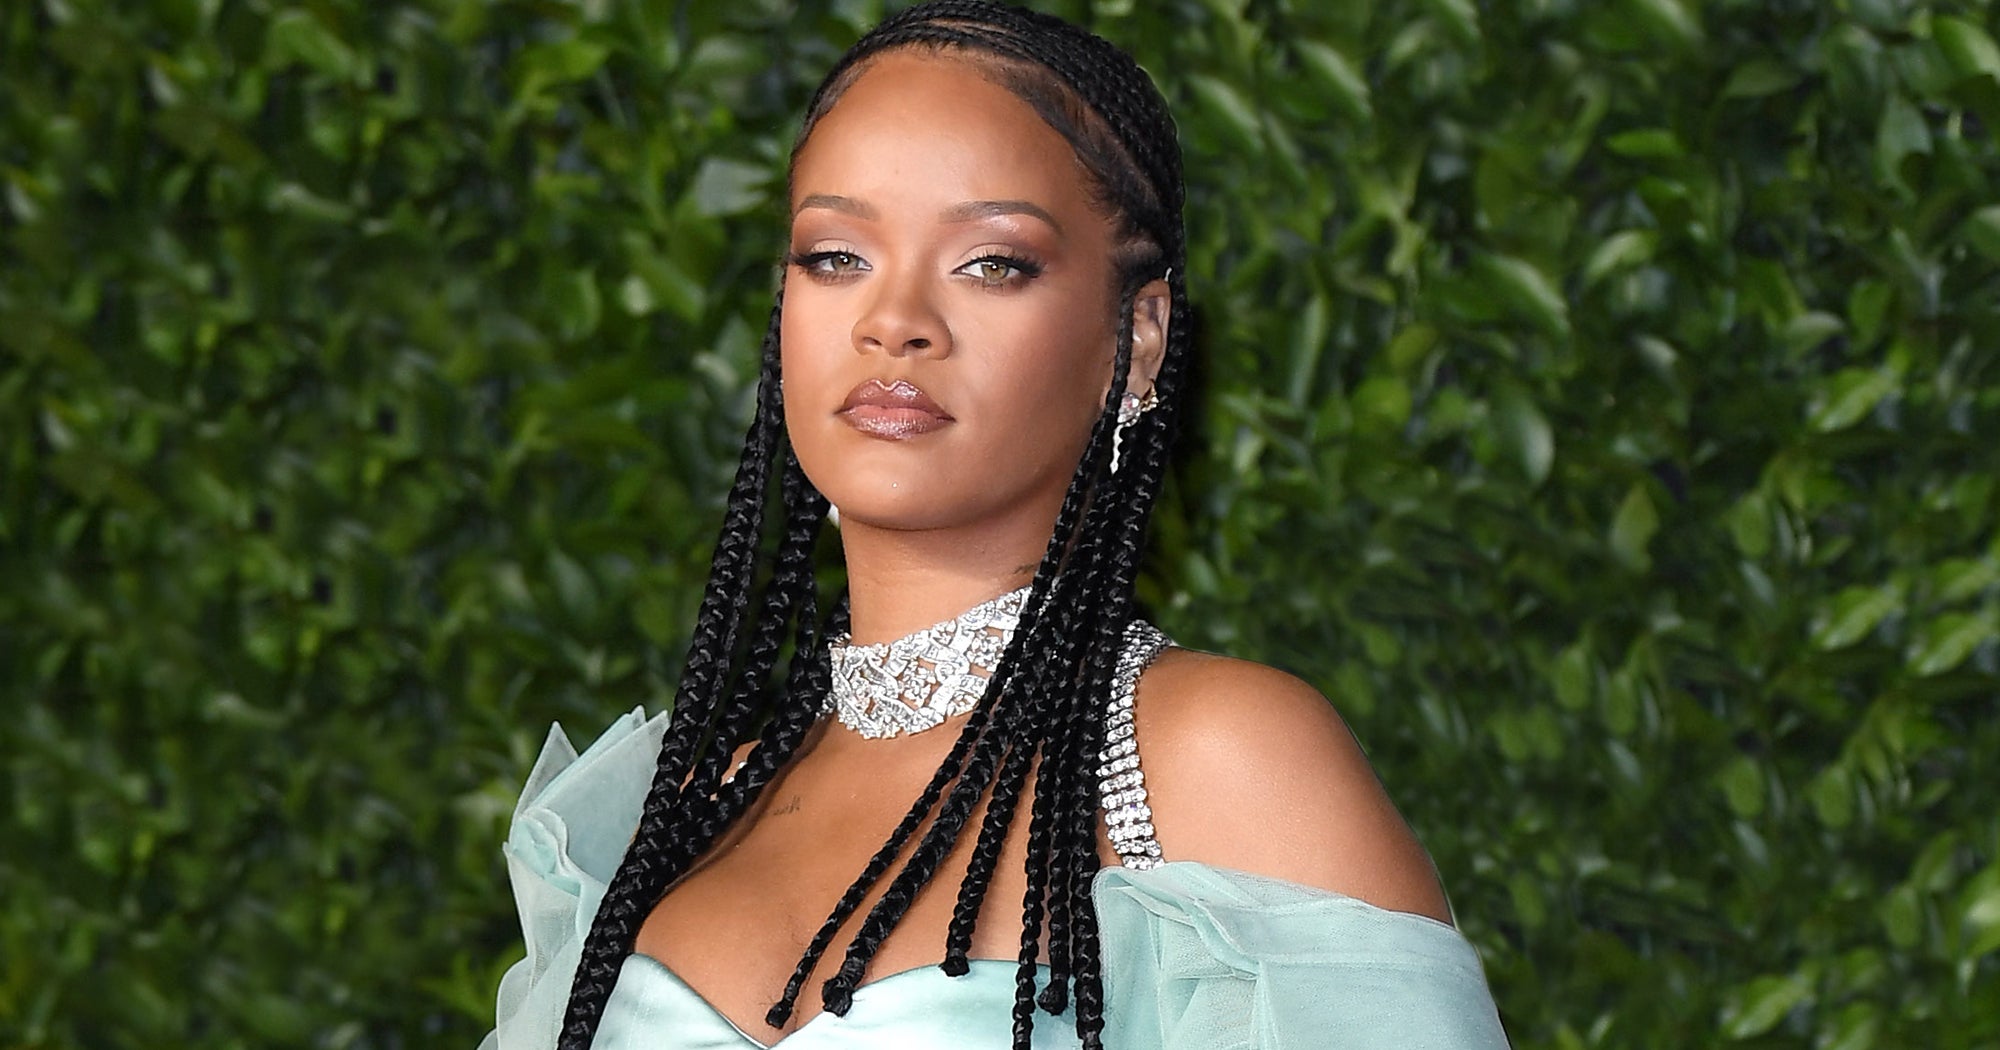 Forbes Officially Crowns Rihanna a Billionaire